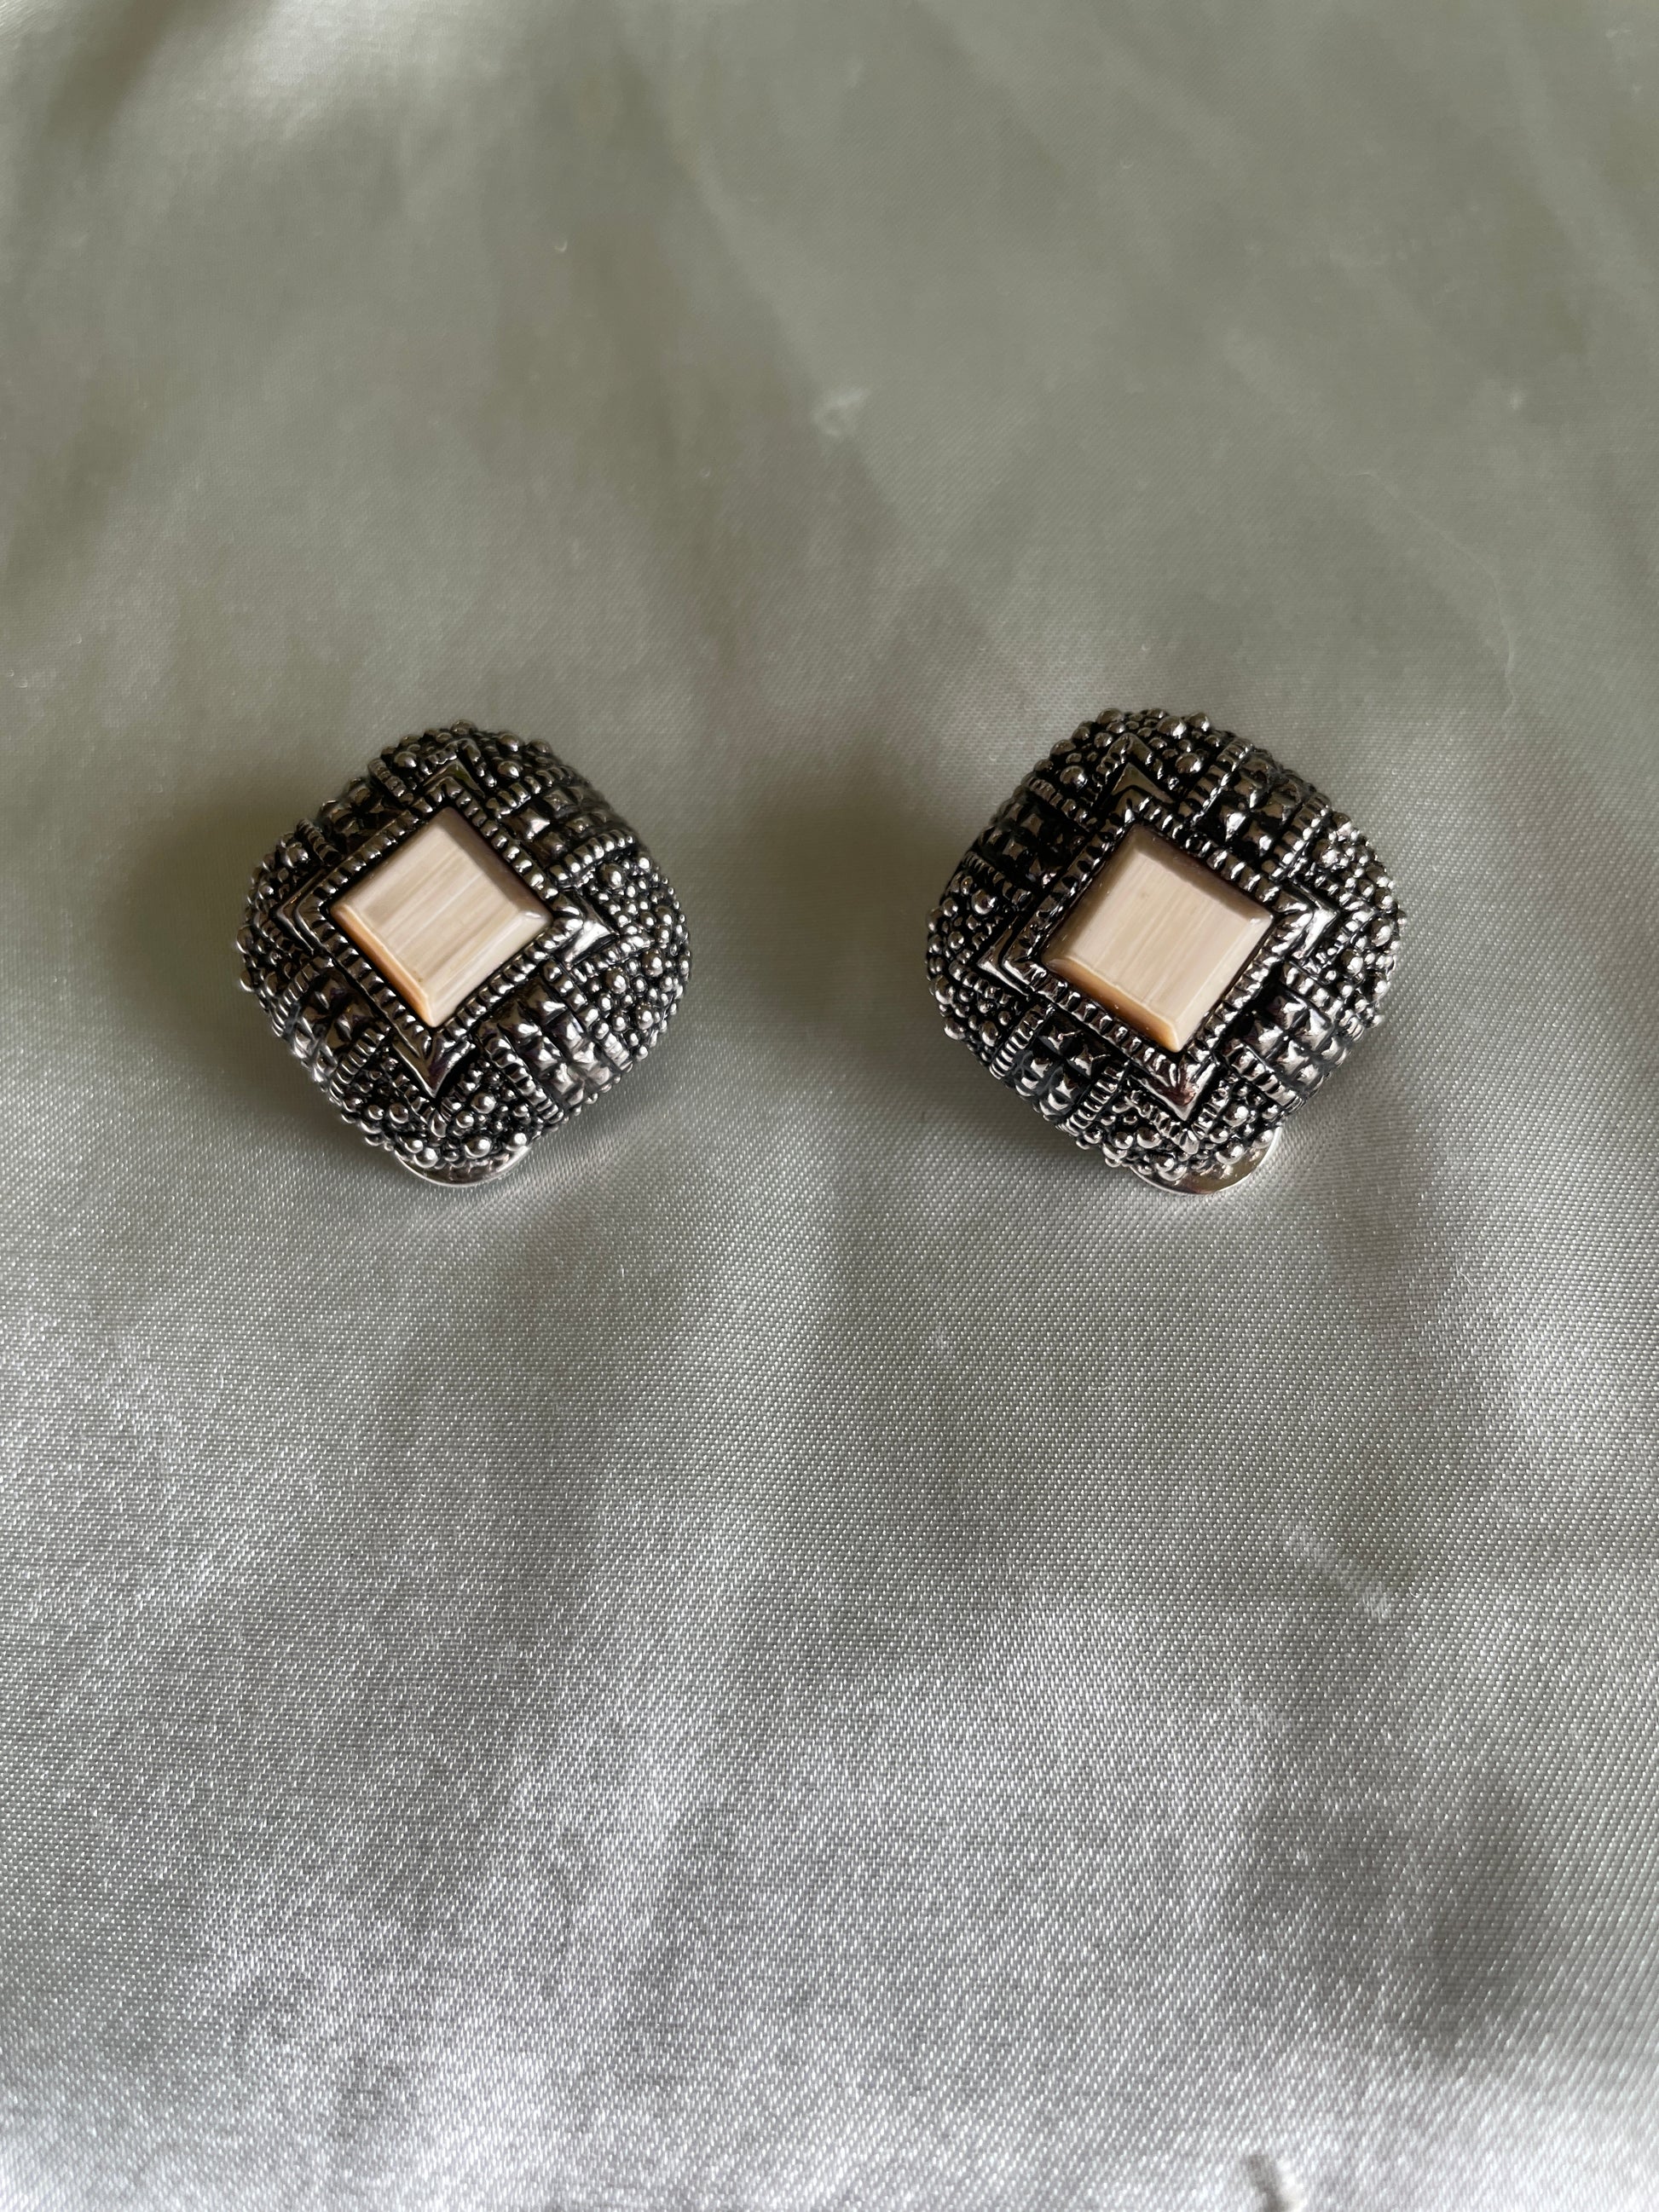 50s clip earrings  80s Silver Tone Mother of Pearl Accent Clip Earrings